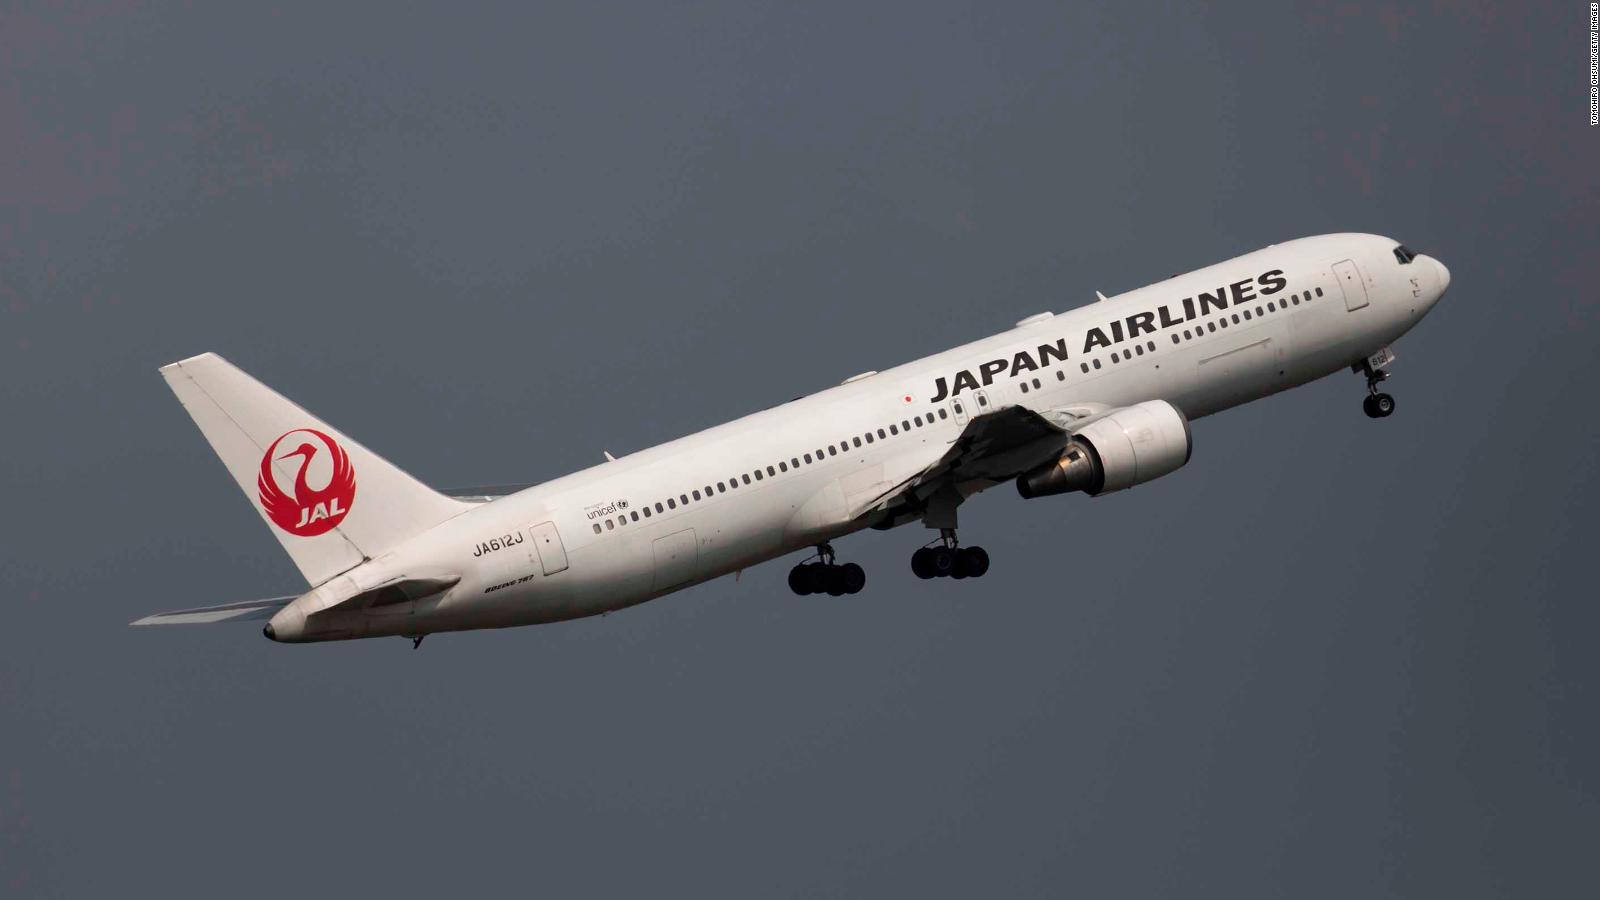 Japan Airlines free tickets: 000 seats up for grabs during Tokyo 2020 Olympics